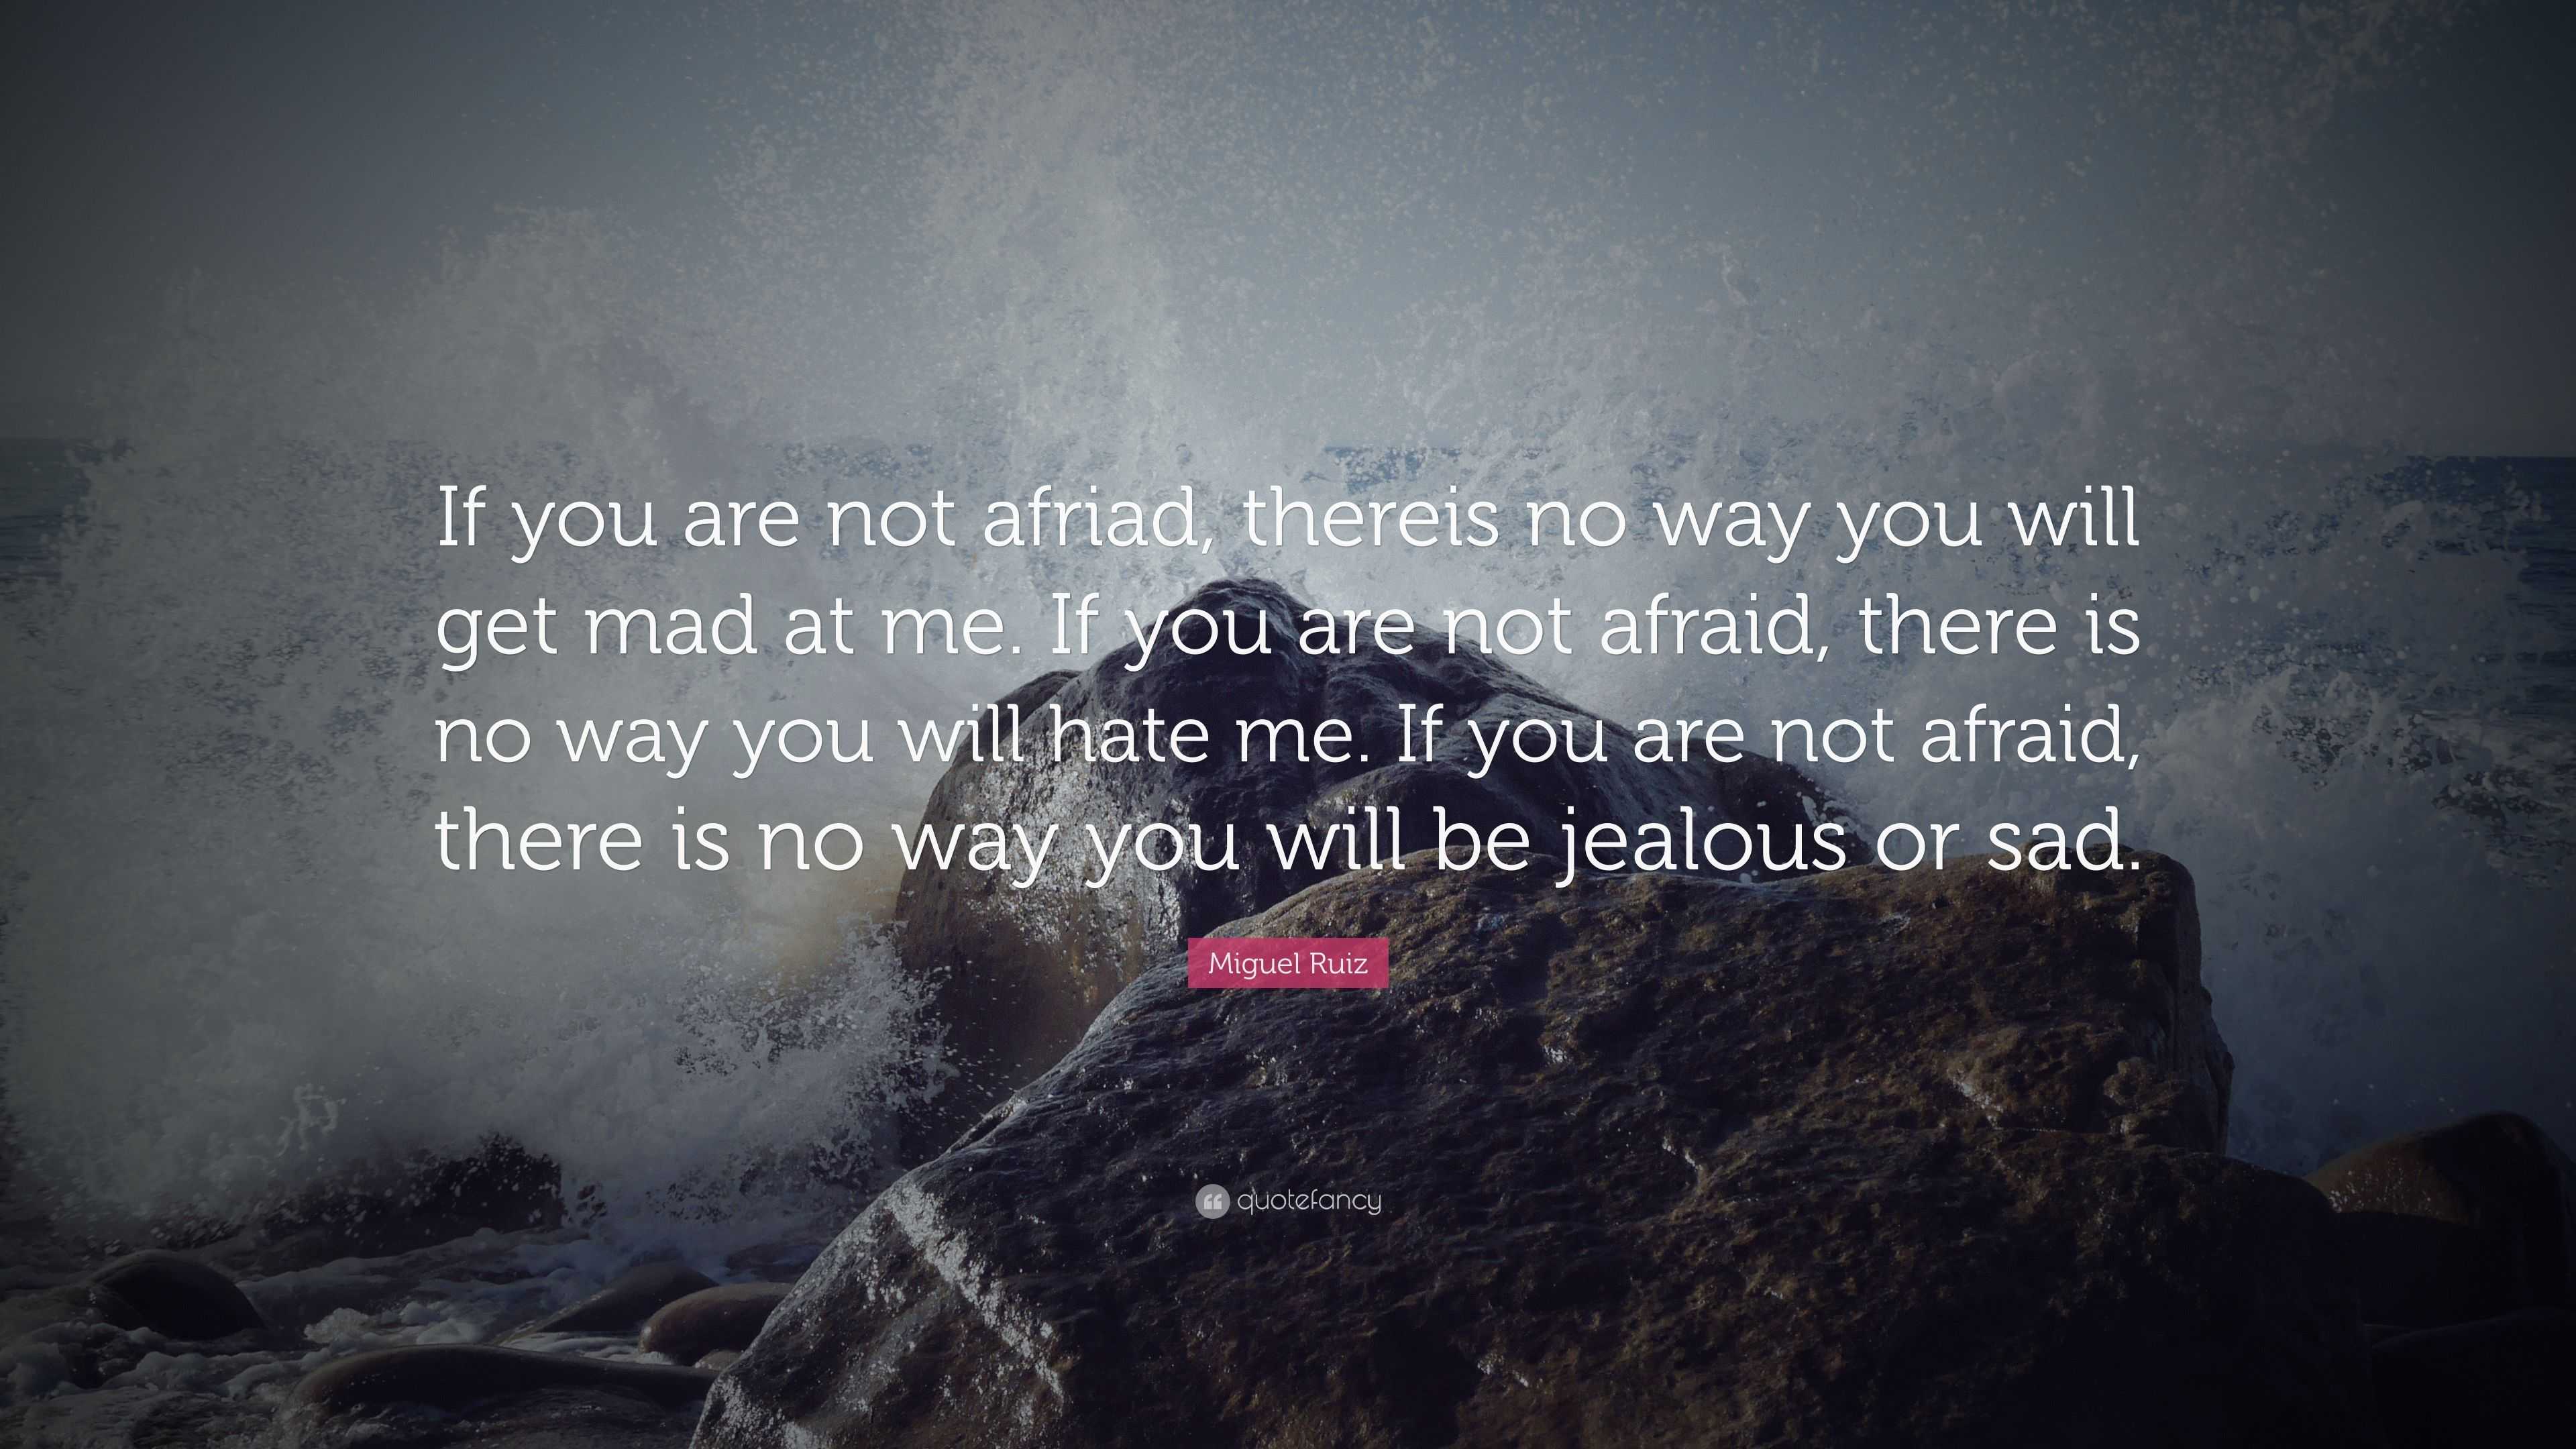 Miguel Ruiz Quote: “If you are not afriad, thereis no way you will get ...